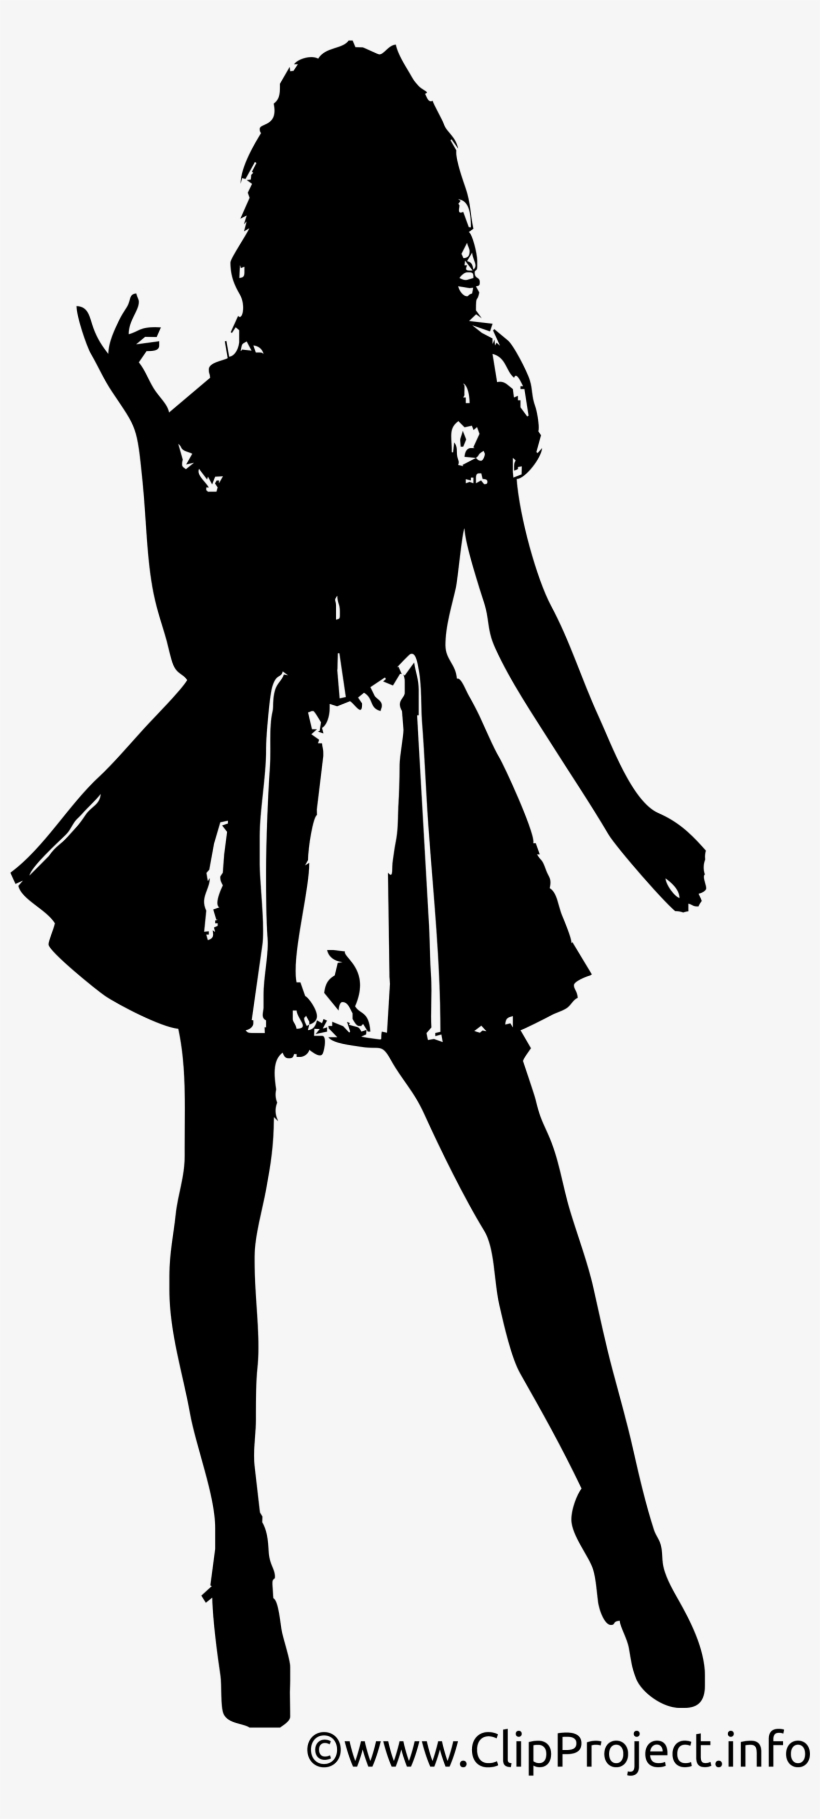 Model Silhouette Png Download - Model Silhouette Png, transparent png #1765748